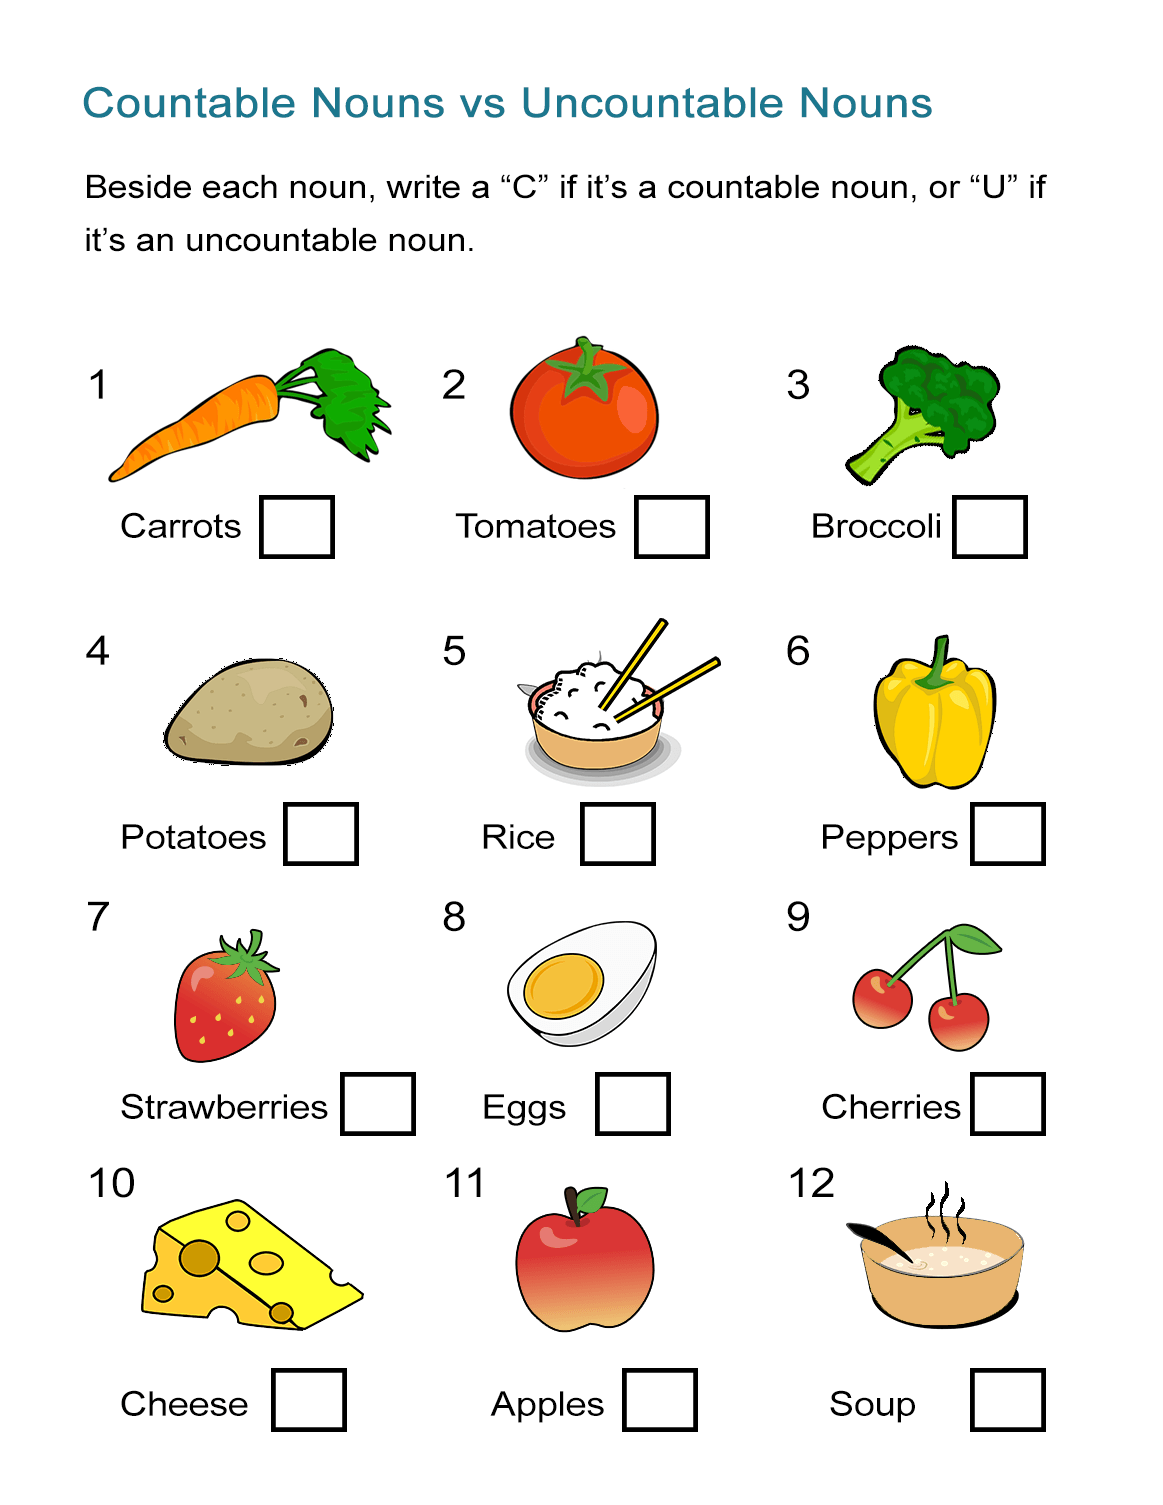 countable-and-uncountable-nouns-worksheet-worksheet-free-esl